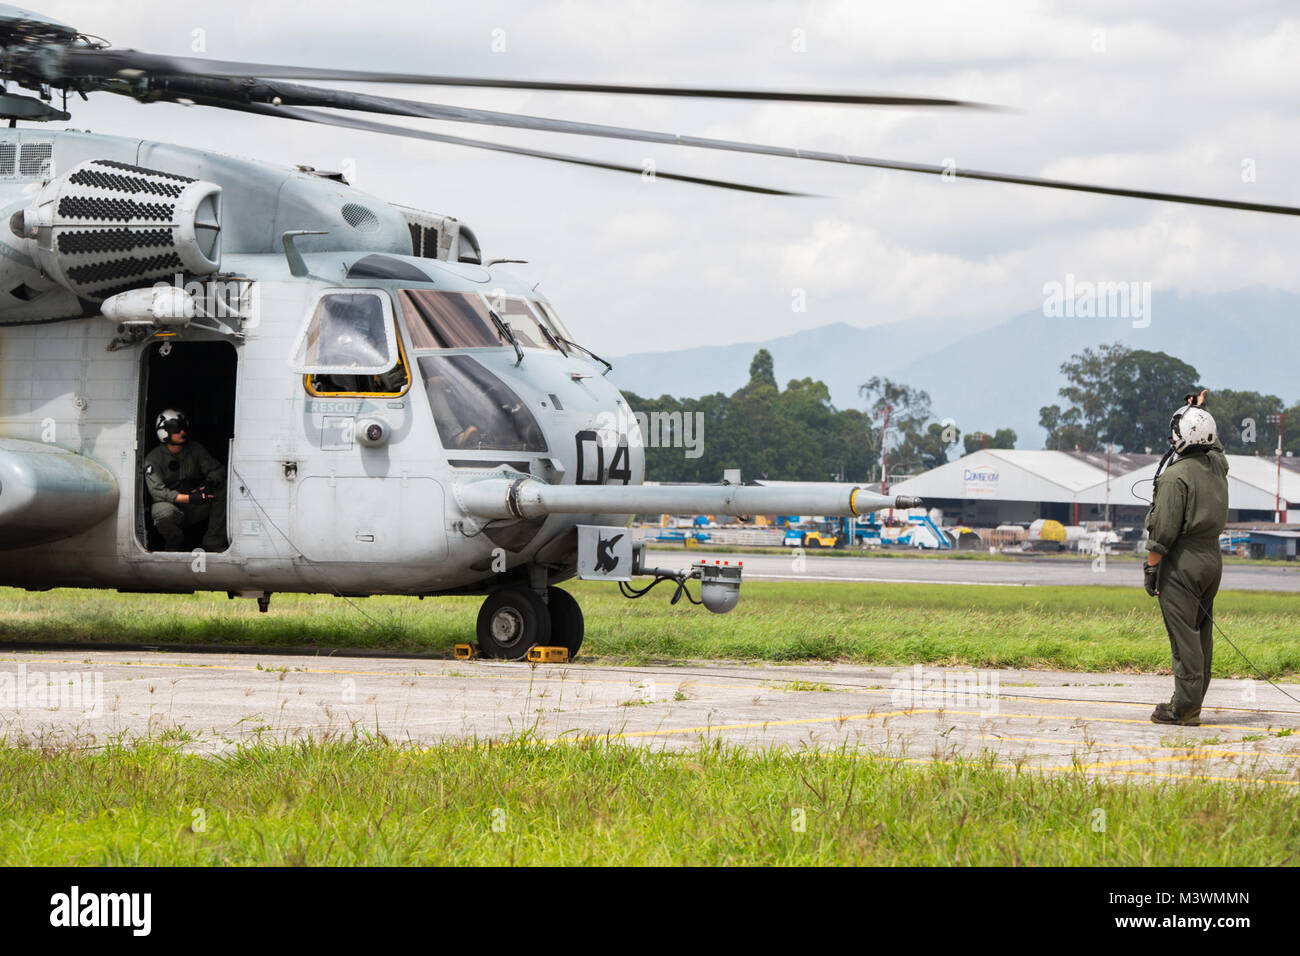 U.S. Marines with the Aviation Combat Element, Special Purpose Marine Air-Ground Task Force - Southern Command, prepare their CH-53E Super Stallion helicopter for takeoff from La Aurora International Airport in Guatemala City, Guatemala, Aug. 1, 2017. The ACE will be operating in Guatemala during the month of August to test the unit’s ability to operate away from their primary base and better support the other elements of the task force. The Marines and sailors of SPMAGTF-SC are deployed to Central America to conduct security cooperation training and engineering projects with their counterpart Stock Photo